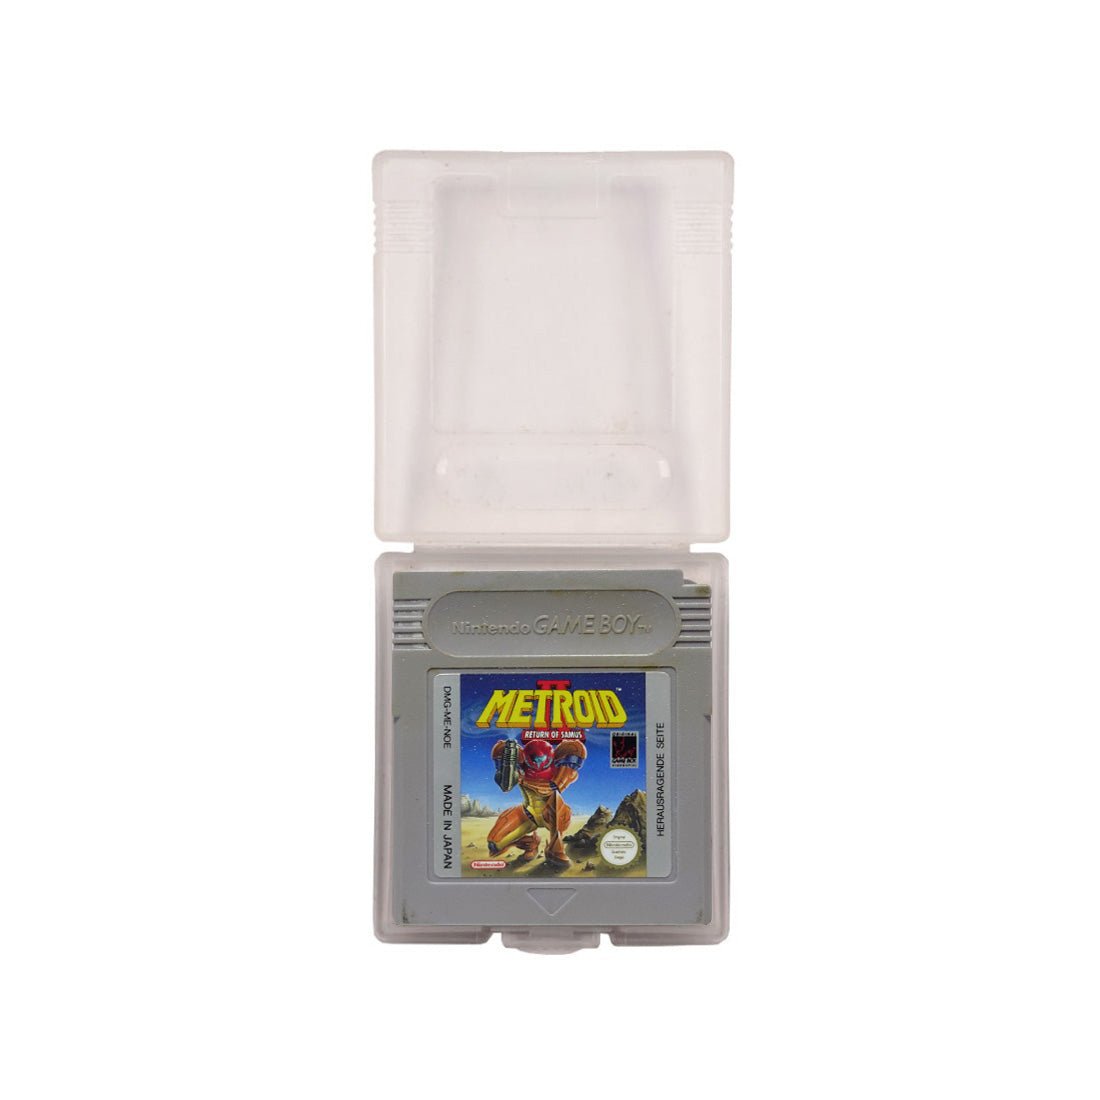 (Pre-Owned) Metroid - Gameboy Classic - ريترو - Store 974 | ستور ٩٧٤